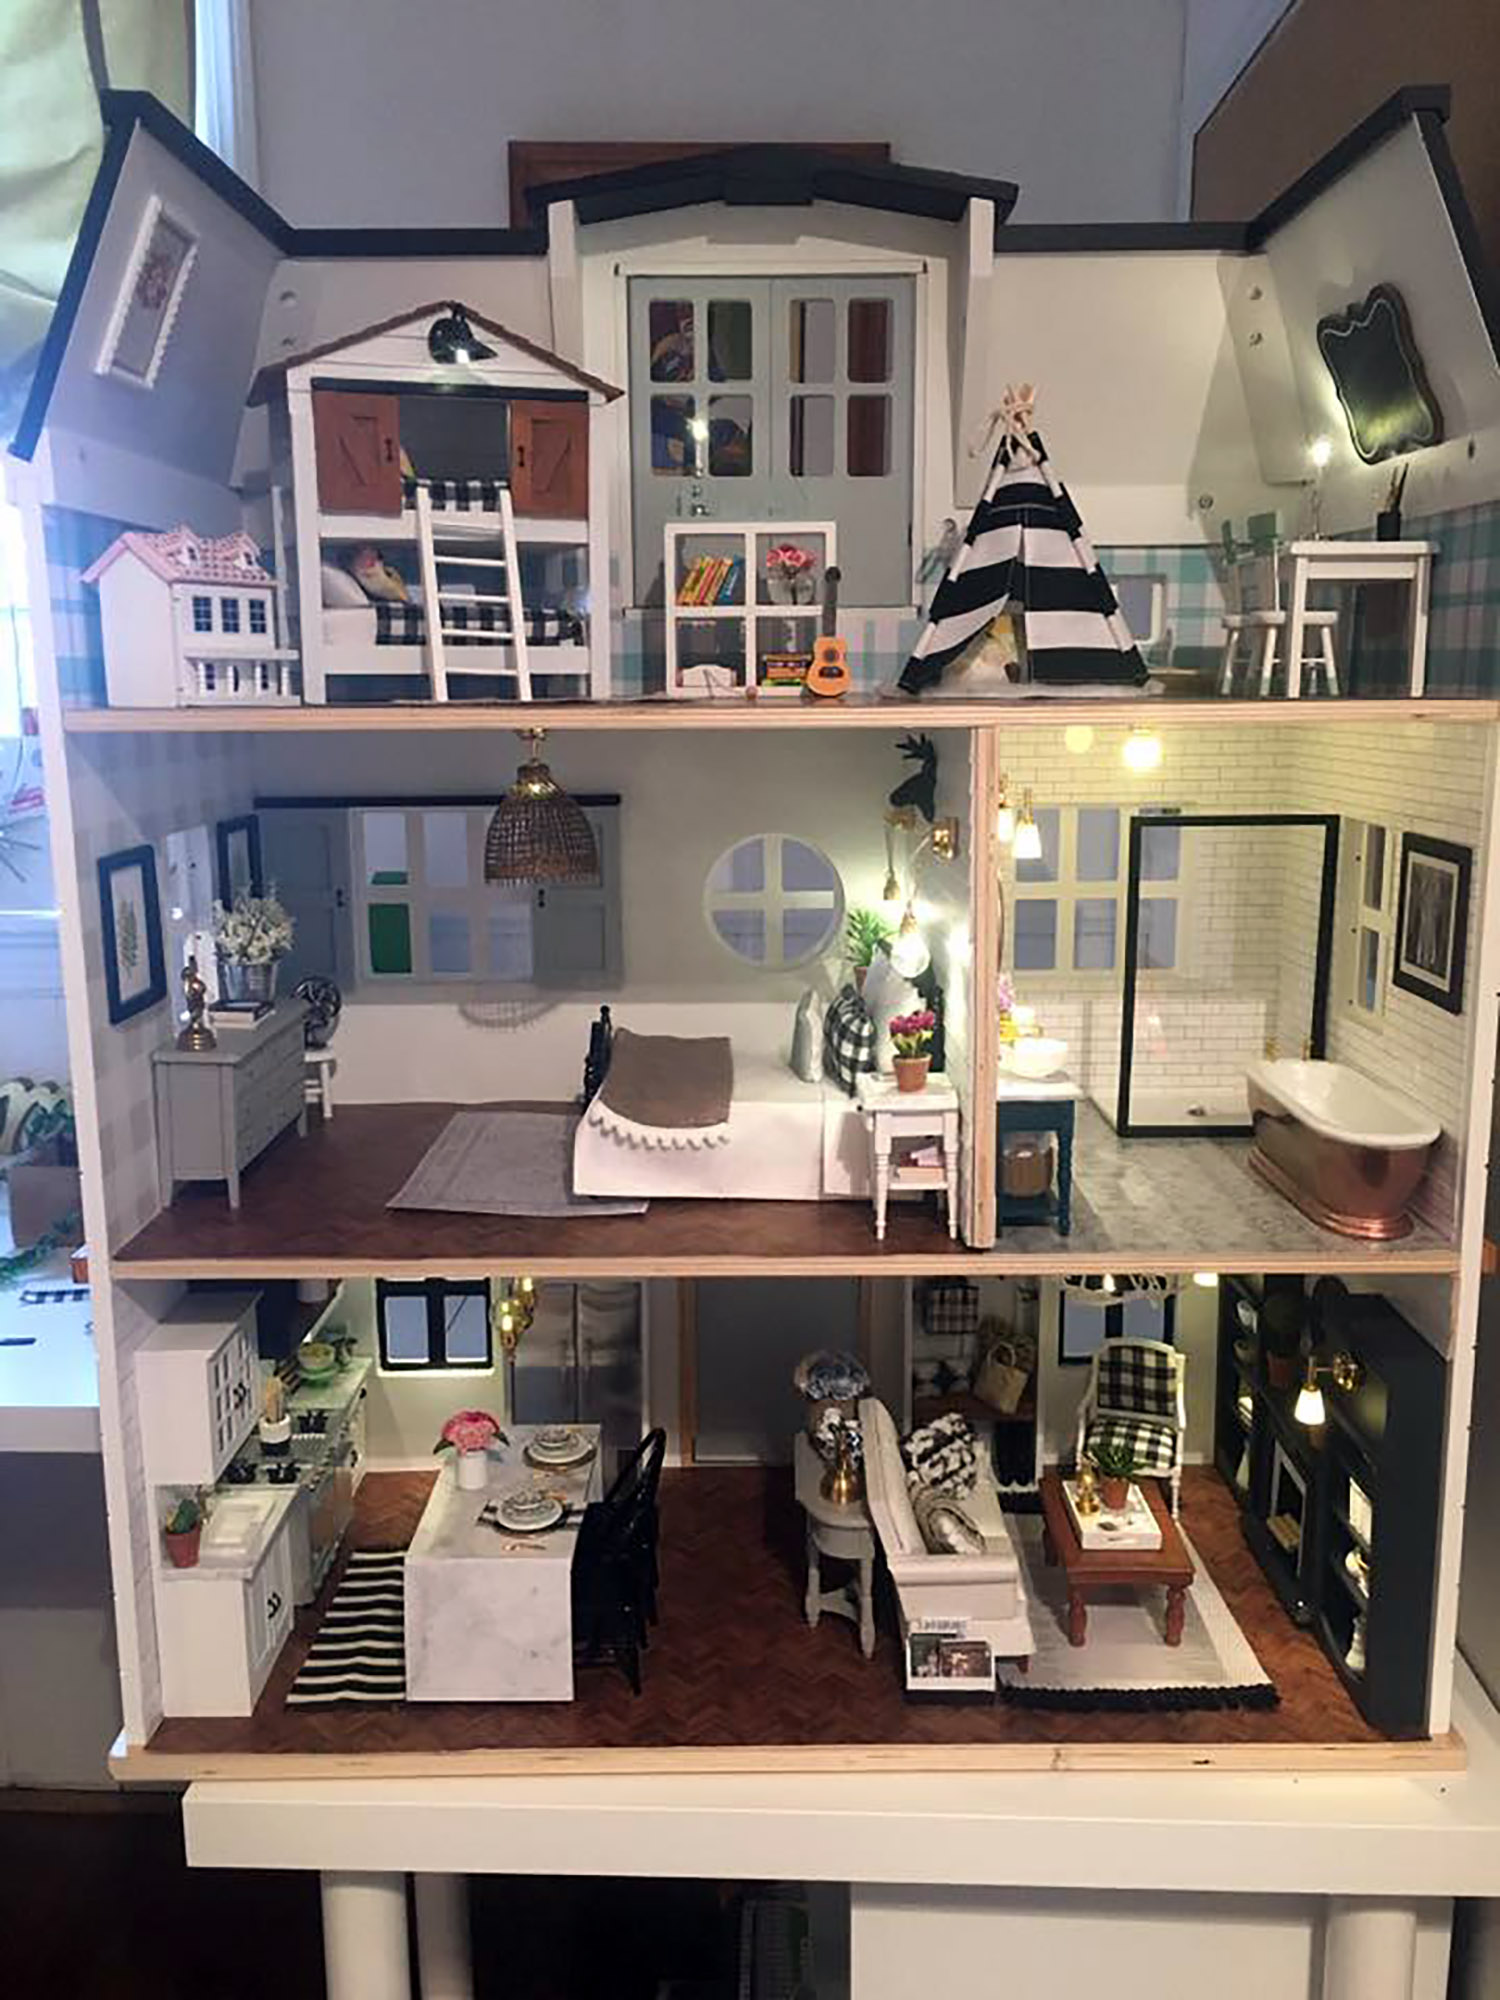 PHOTO: Kwandaa Roberts hand-painted and built furniture for her "Fixer Upper" inspired-dollhouse.